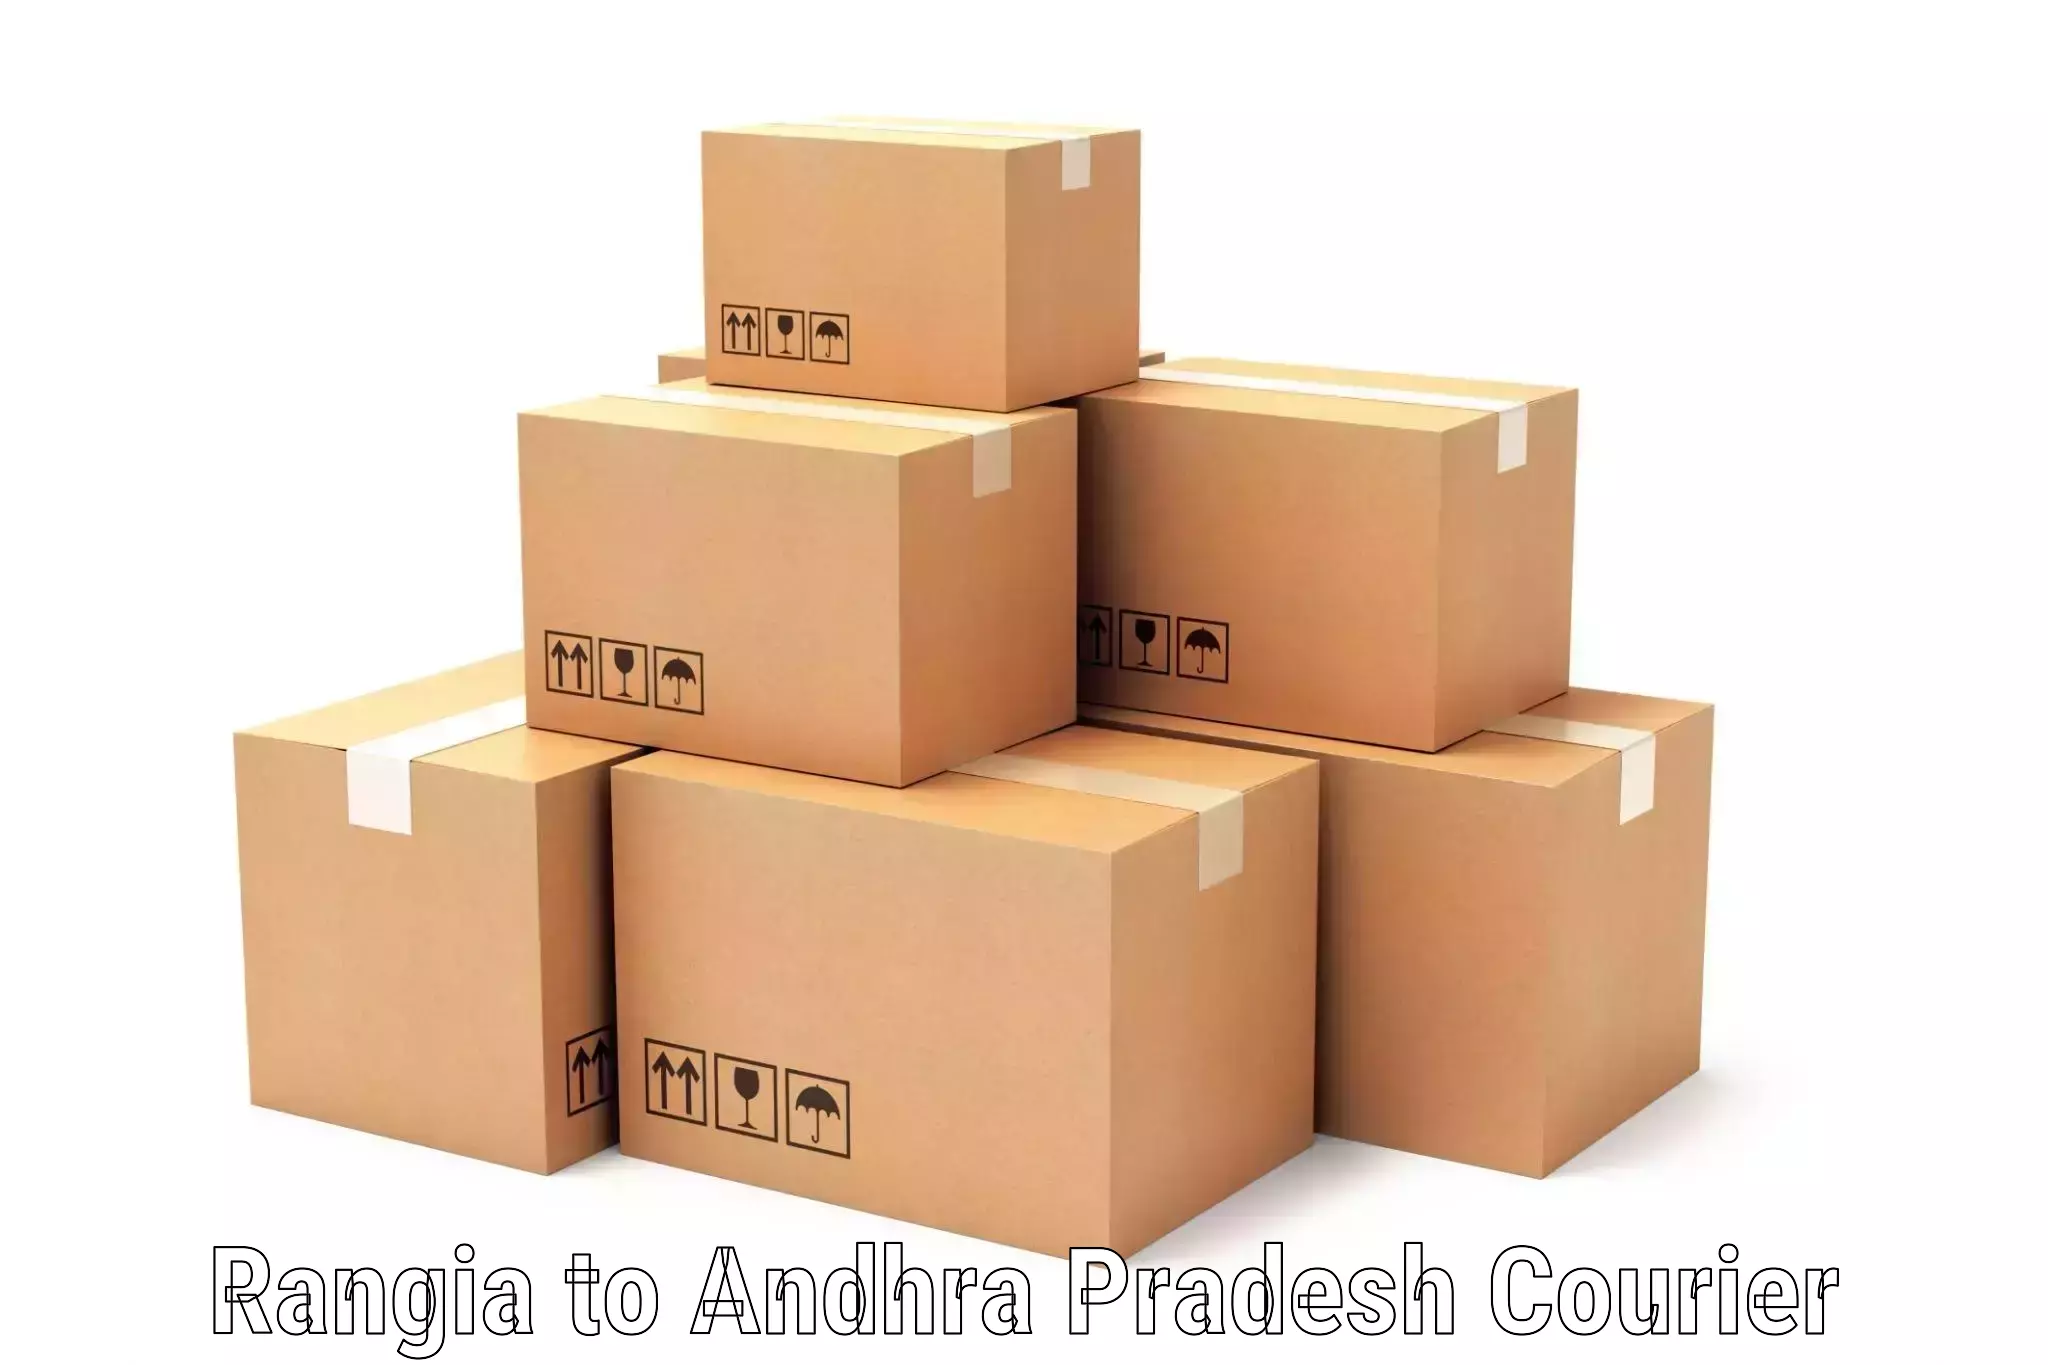 Express delivery solutions Rangia to Visakhapatnam Port